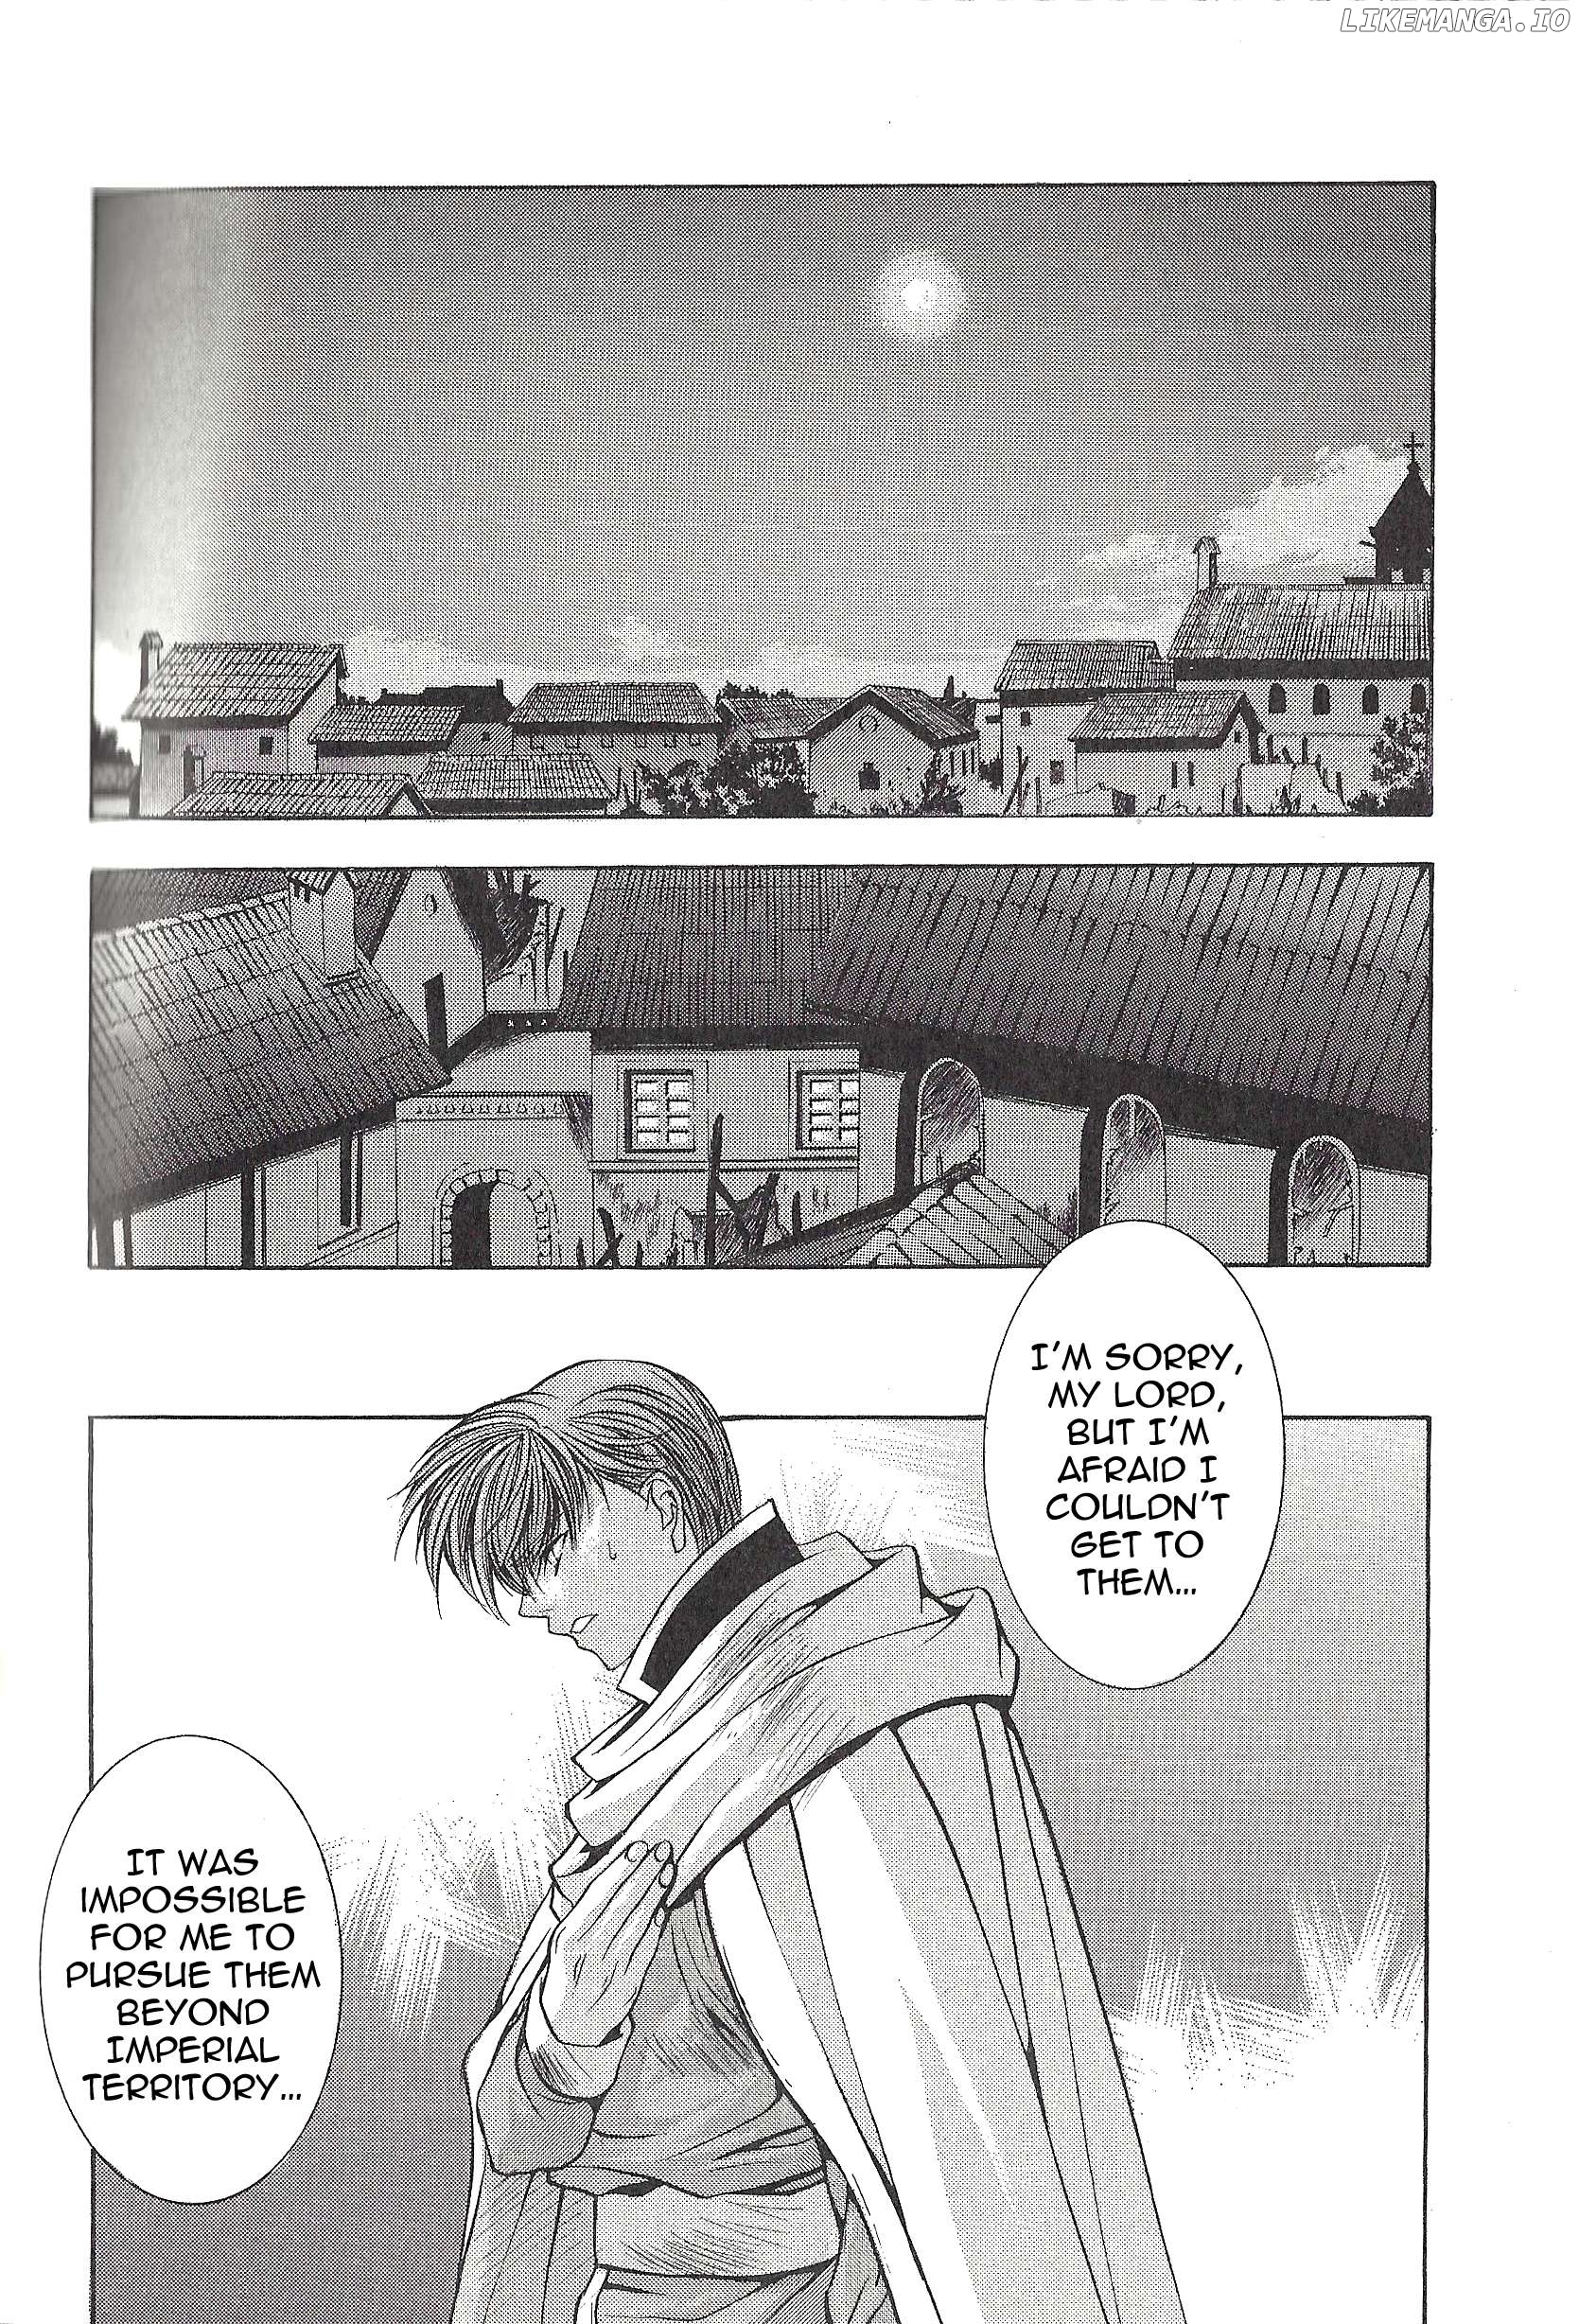 Fire Emblem - Thracia 776 Chapter 3 - page 25